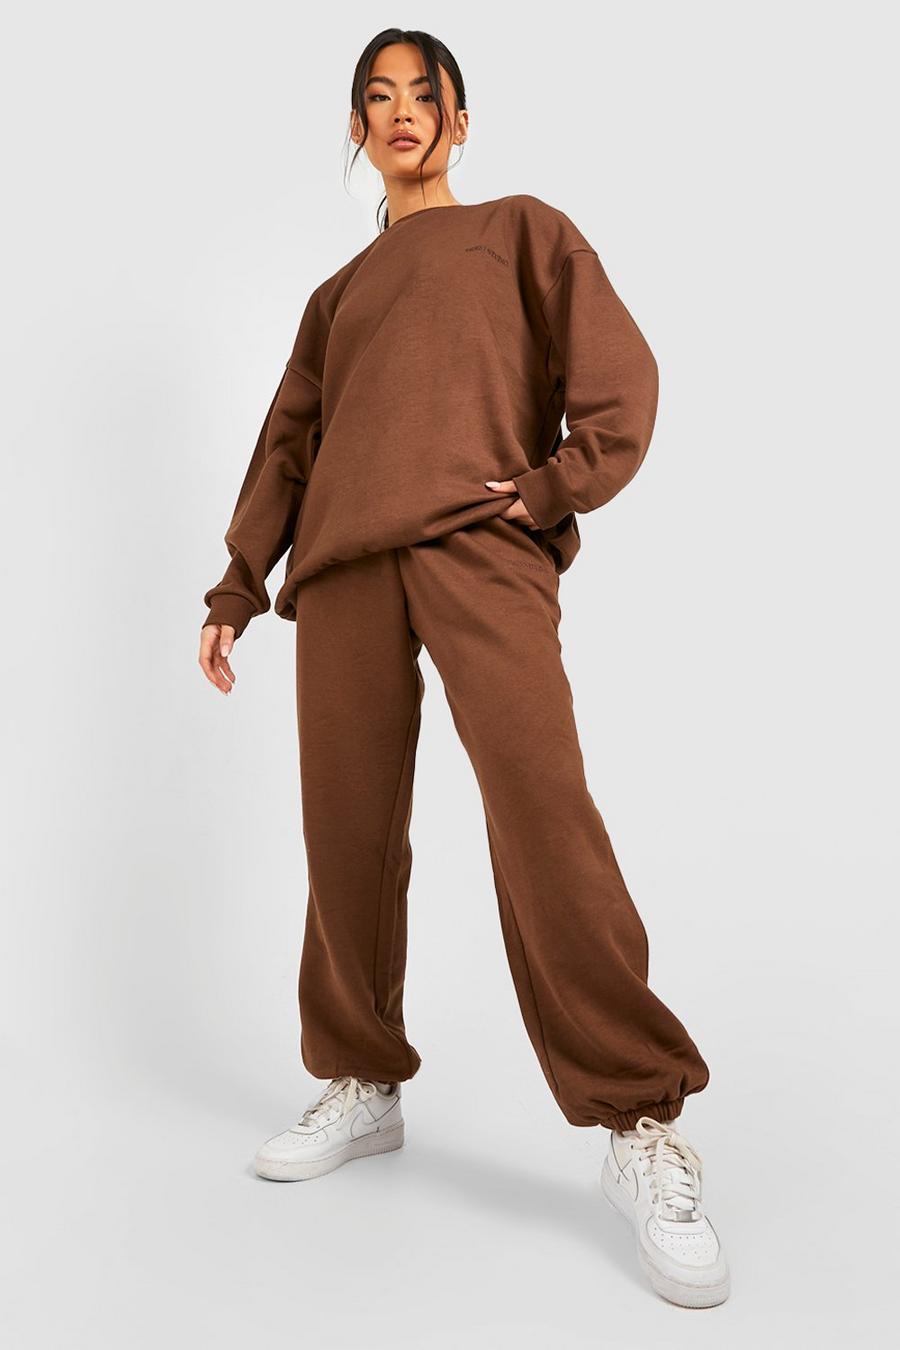 Chocolate brun Slogan Embroidered Oversized Sweater Tracksuit